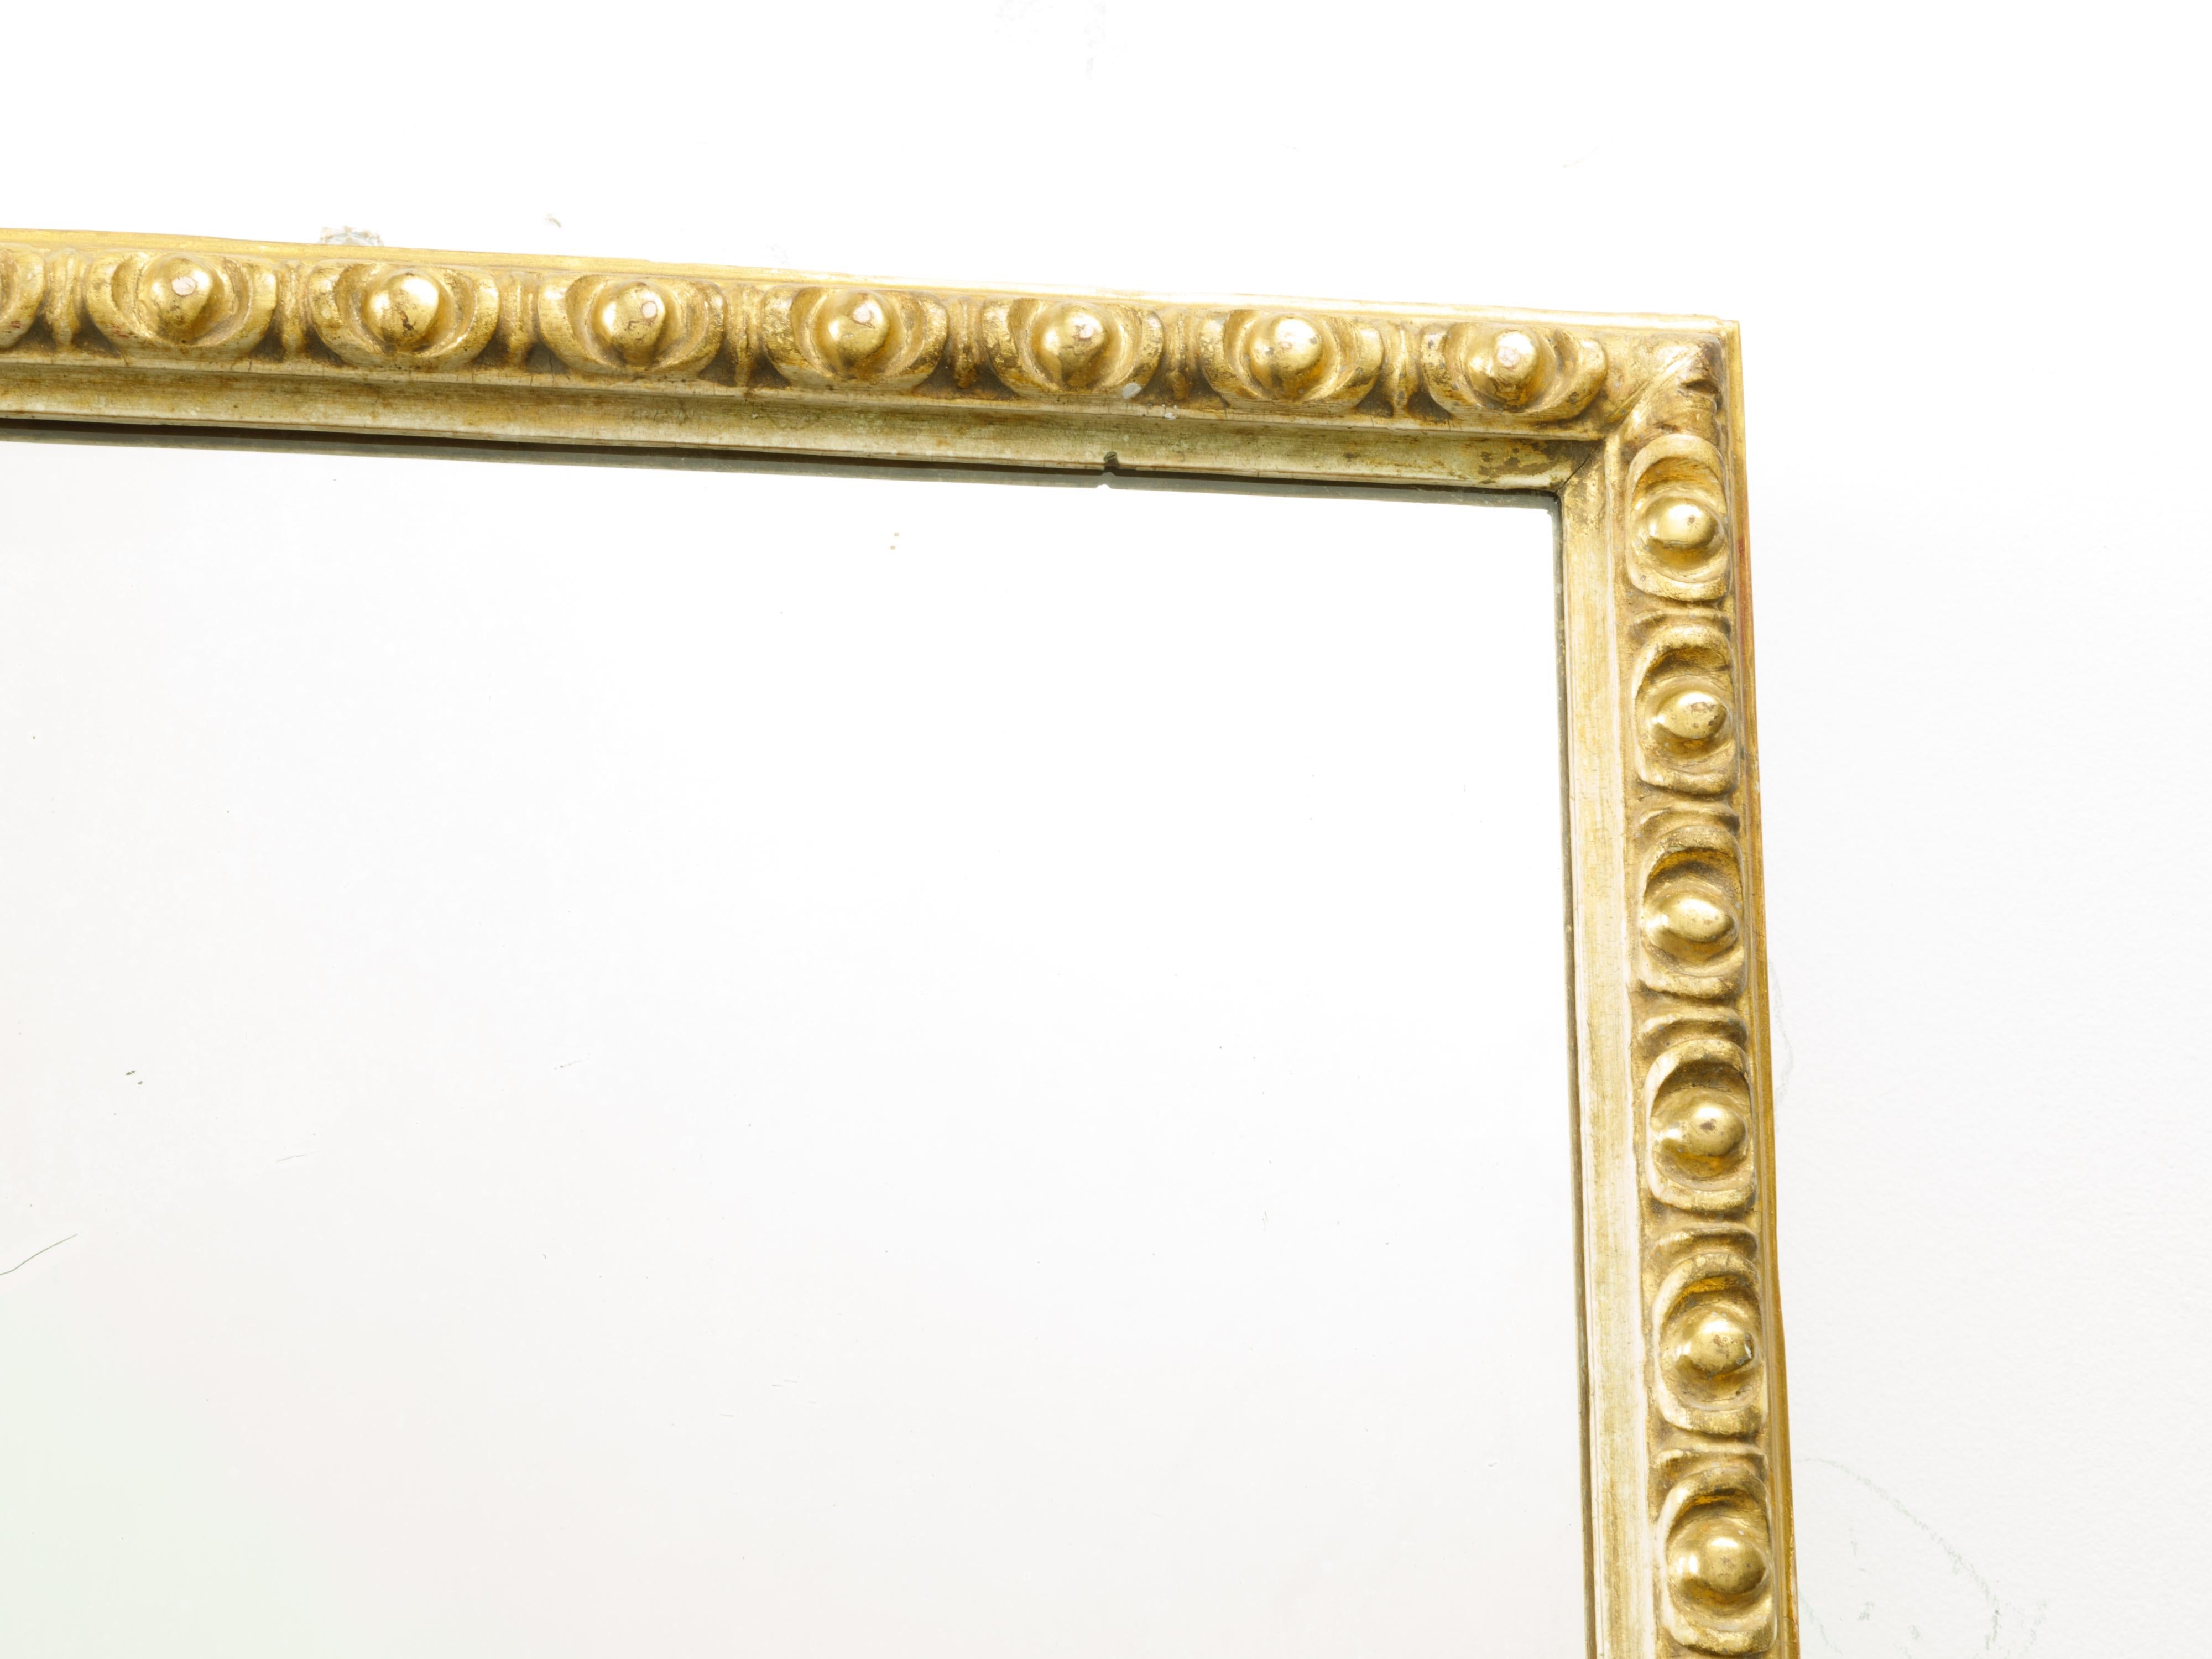 20th Century French Midcentury Rectangular Giltwood Mirror with Carved Ovoid Motifs For Sale